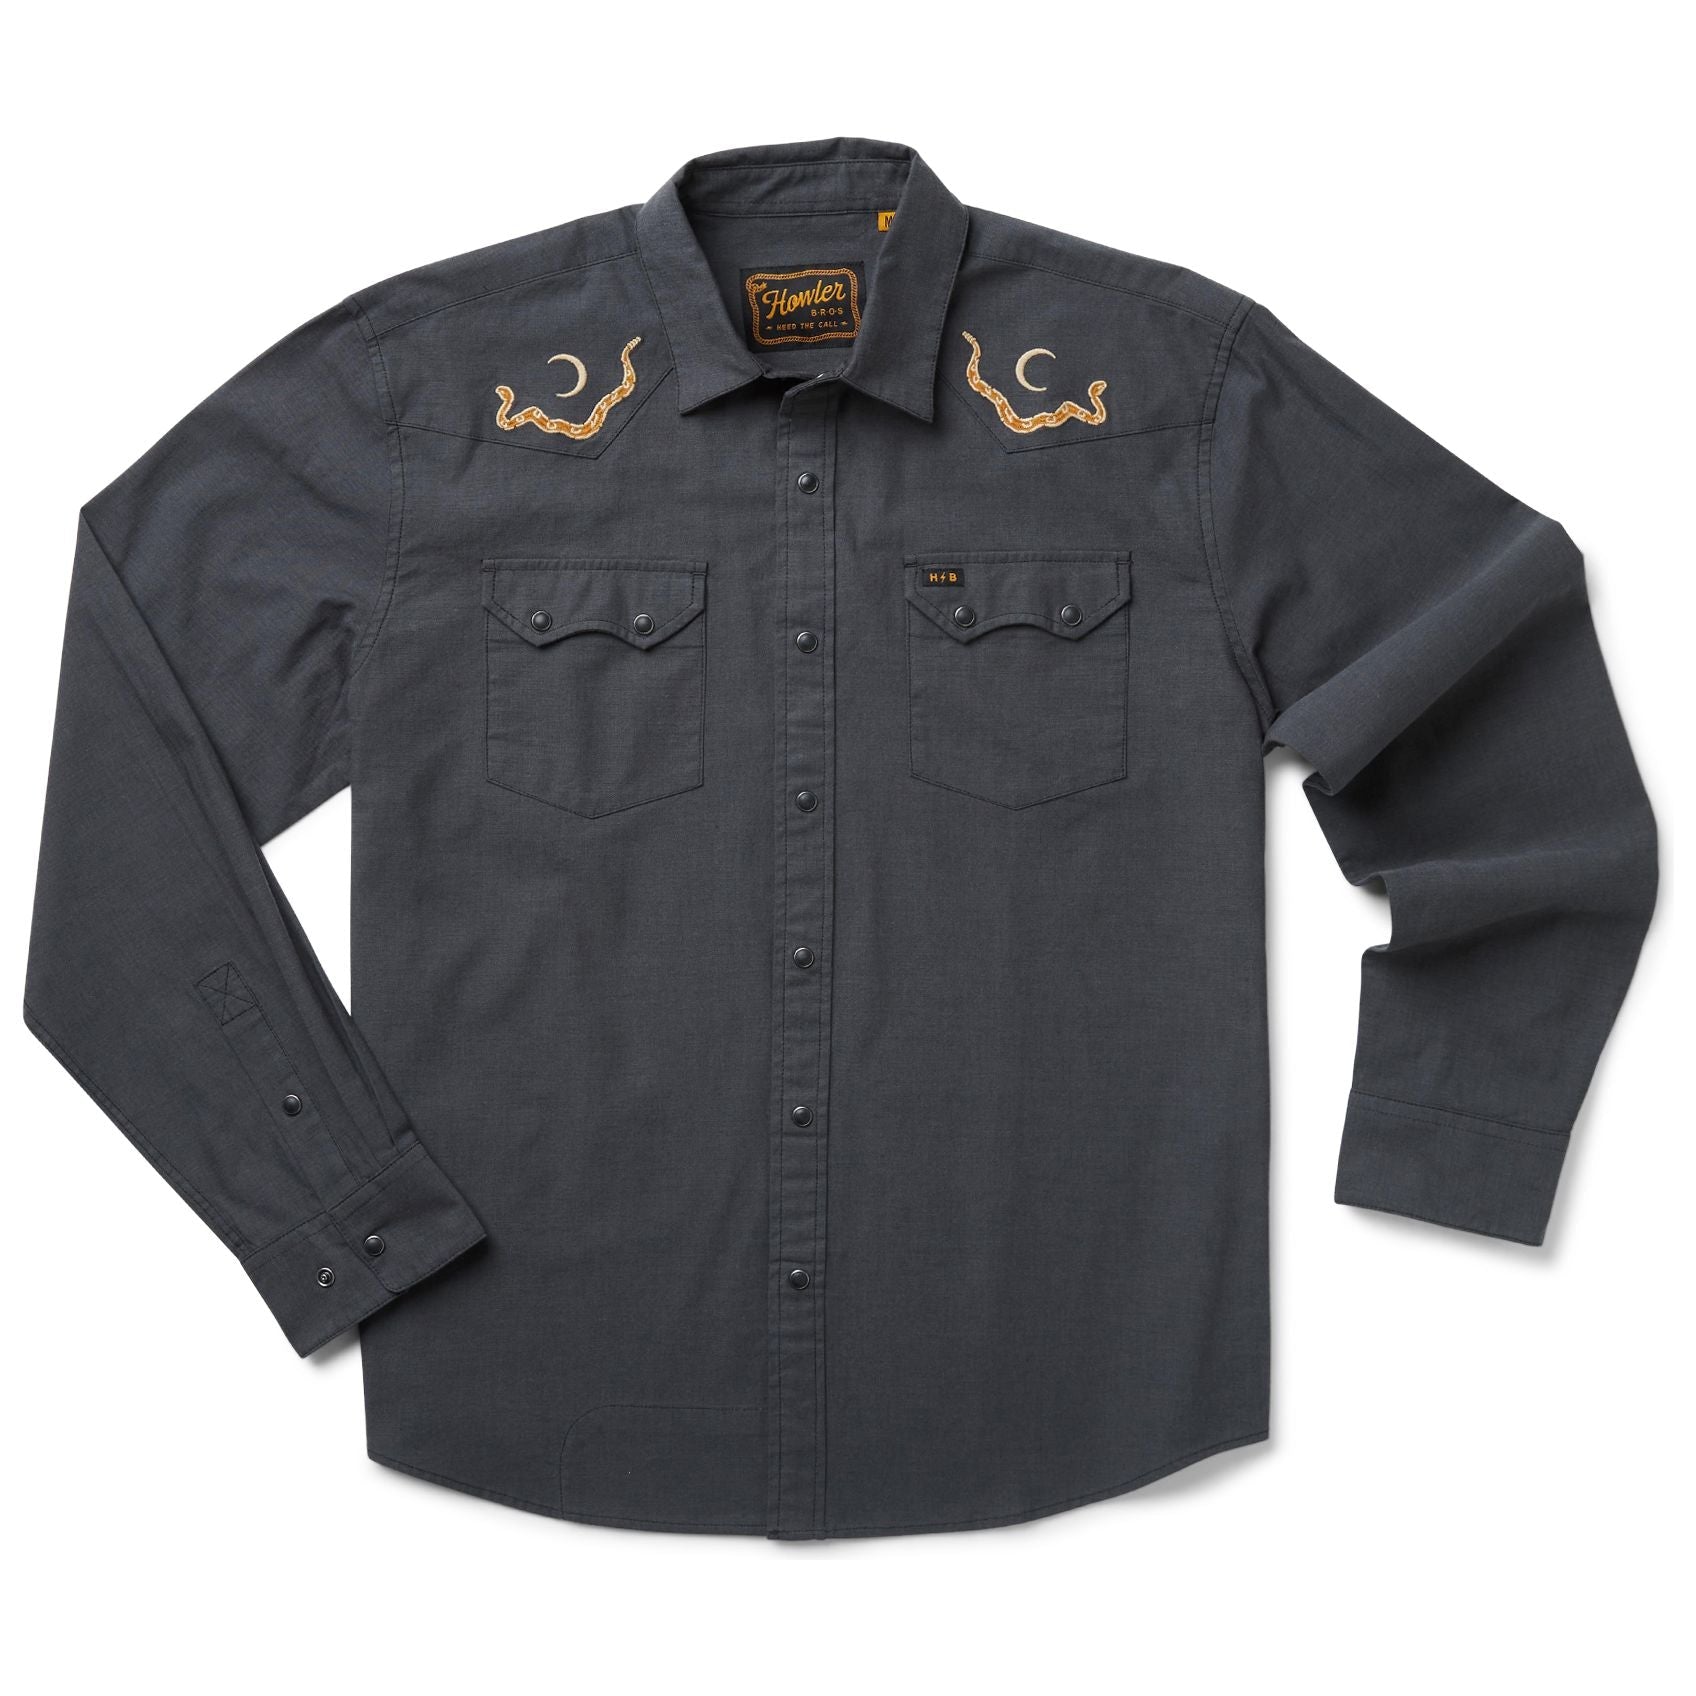 Howler Brothers Crosscut Deluxe - Sale